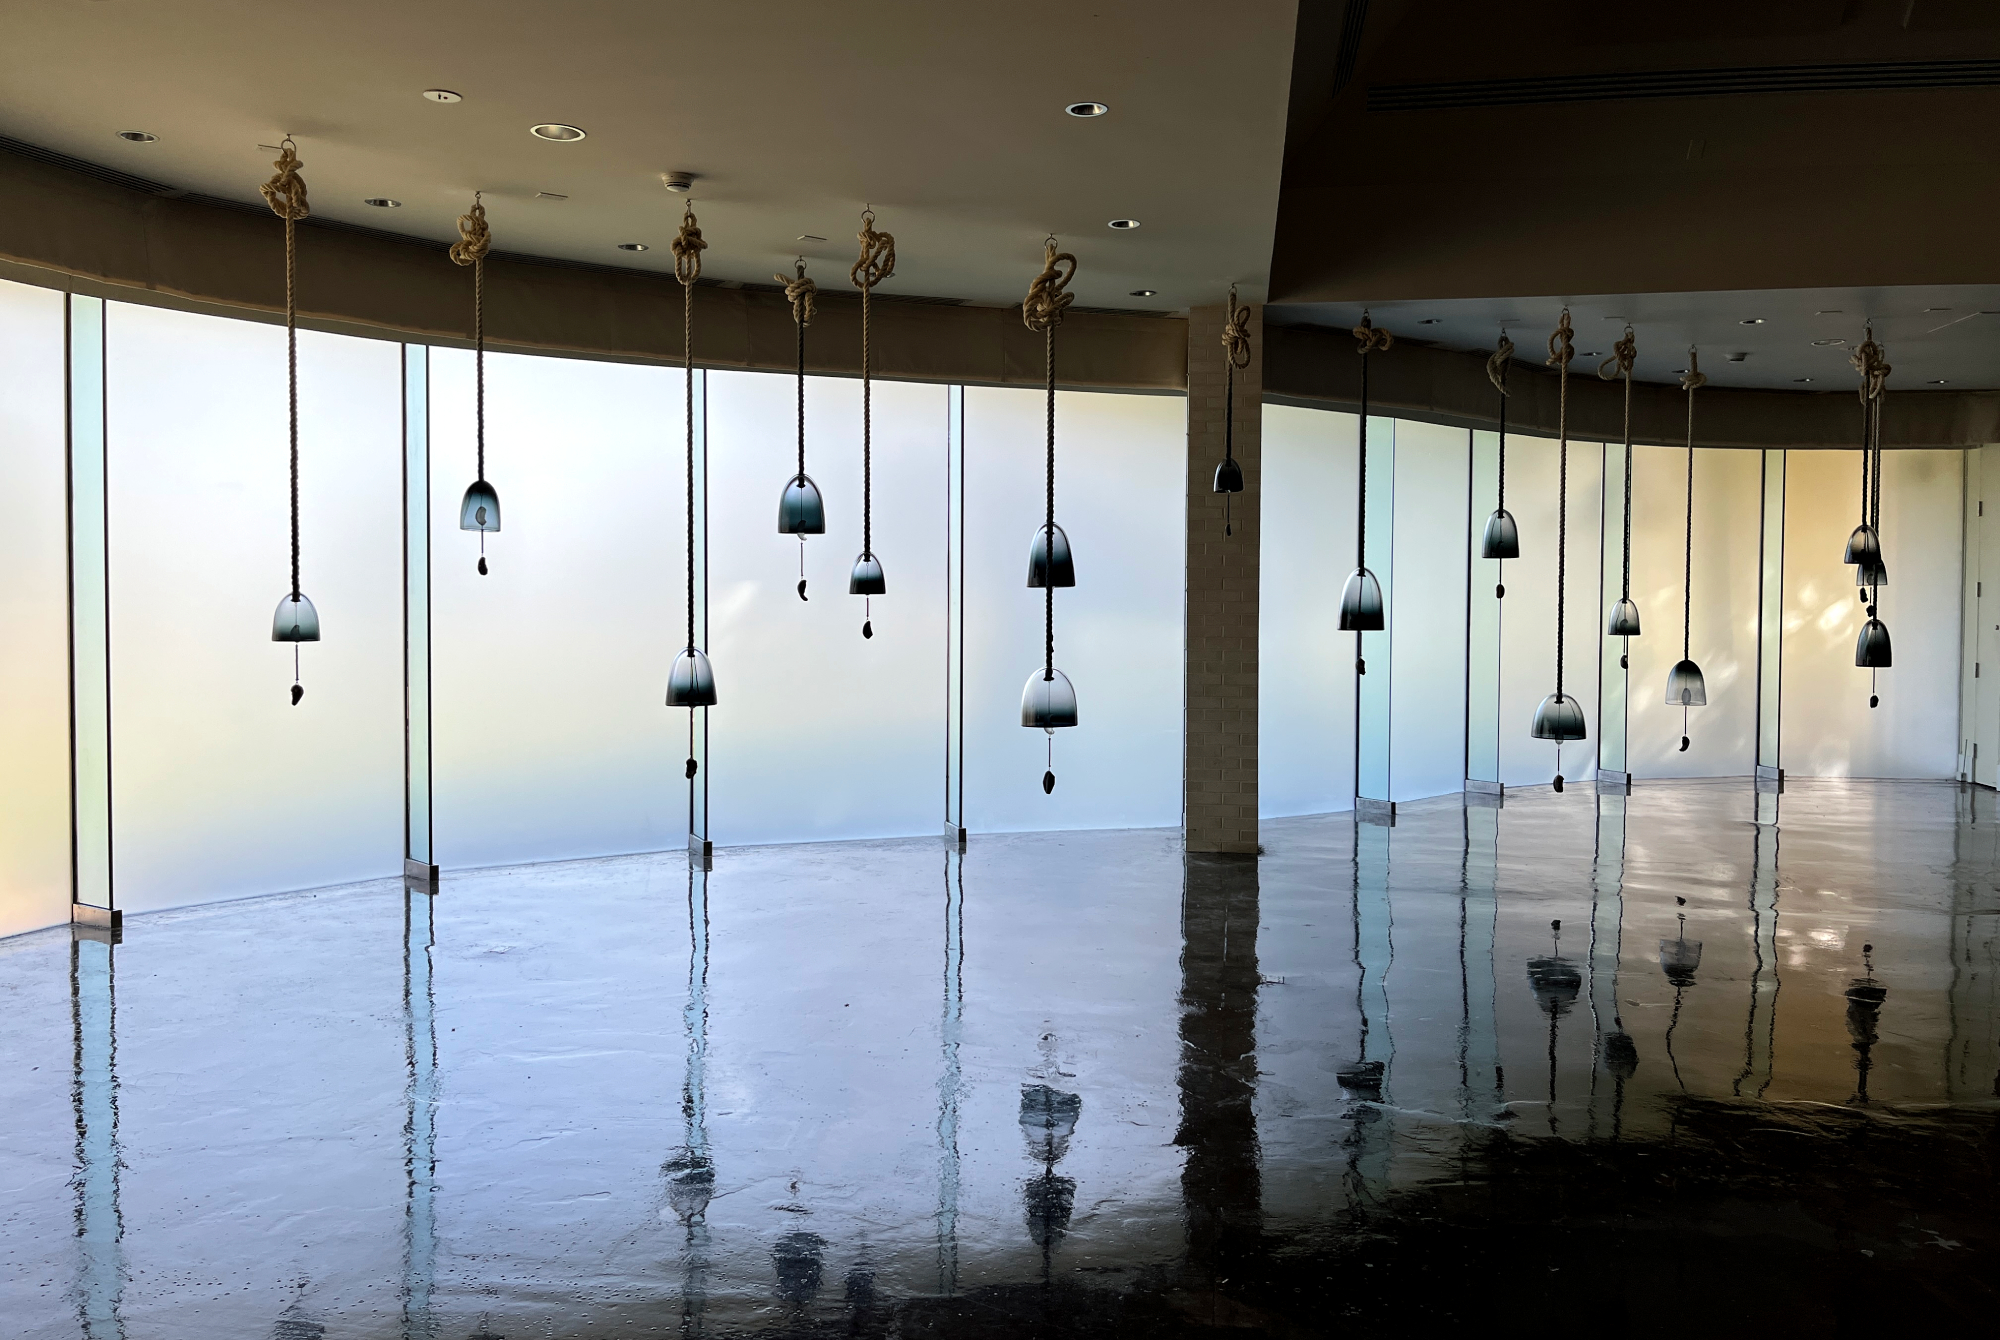 Image: Jenny Kendler and Andrew Bearnot, Whale Bells, 2019-ongoing, hand-blown ombré glass, miocene-era fossilized whale ear bones, cotton rope, and felt. Installation in a museum space with a frosted glass paneled wall as a backdrop. From the ceiling hang approximately fourteen ropes at the bottom of which are glass bell shapes. From the bells hang fossilized whale ears. The light is dramatic, and the bells are reflected in the shiny floor. Photo by Jessica Hammie.